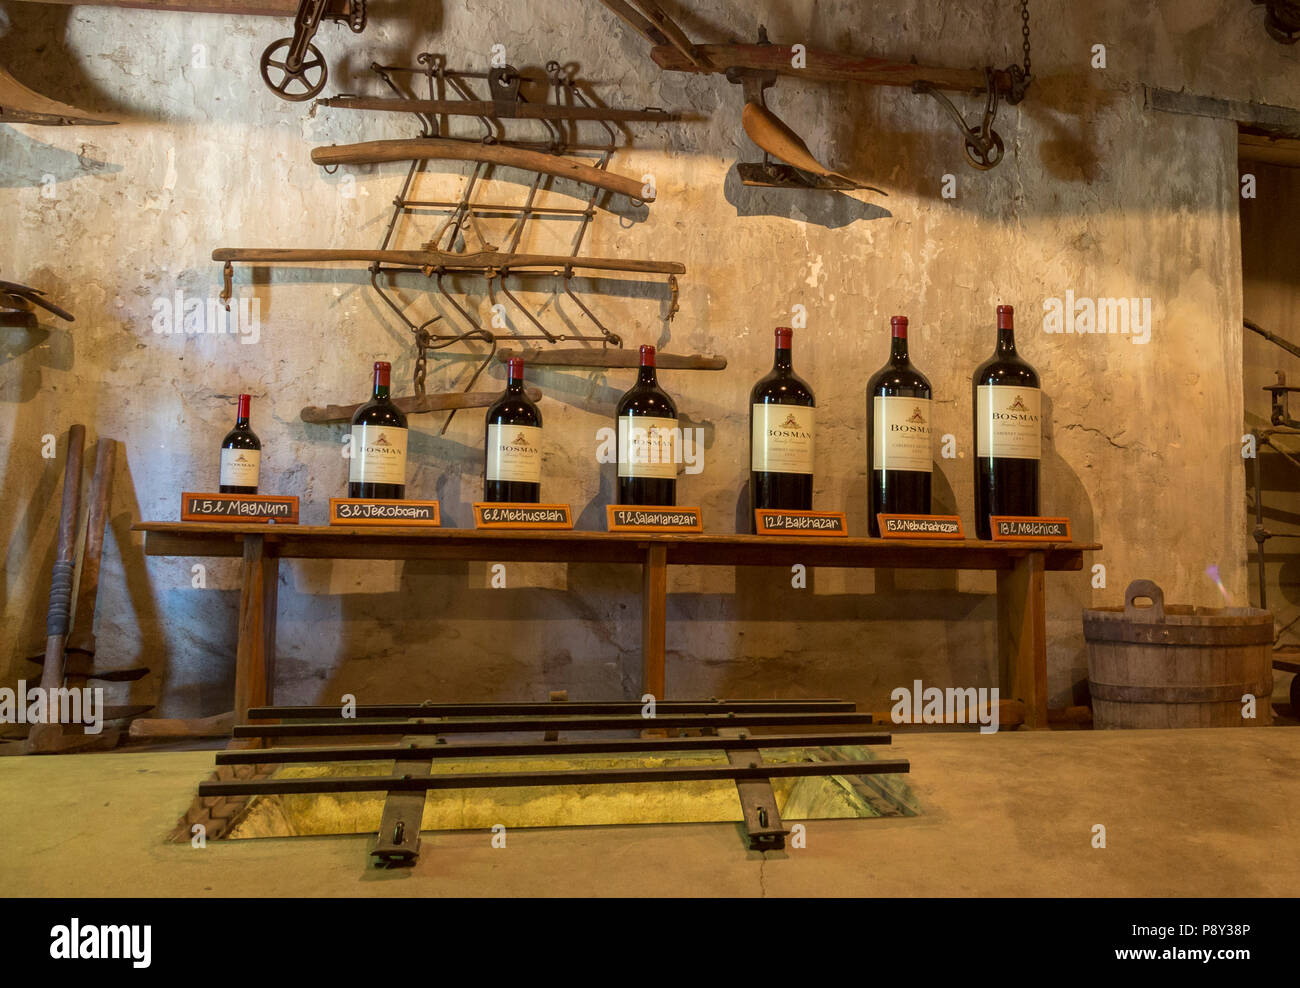 Still life display at the Bosman museum showing old wooden farming implements and a sample range of different size wine bottles Stock Photo